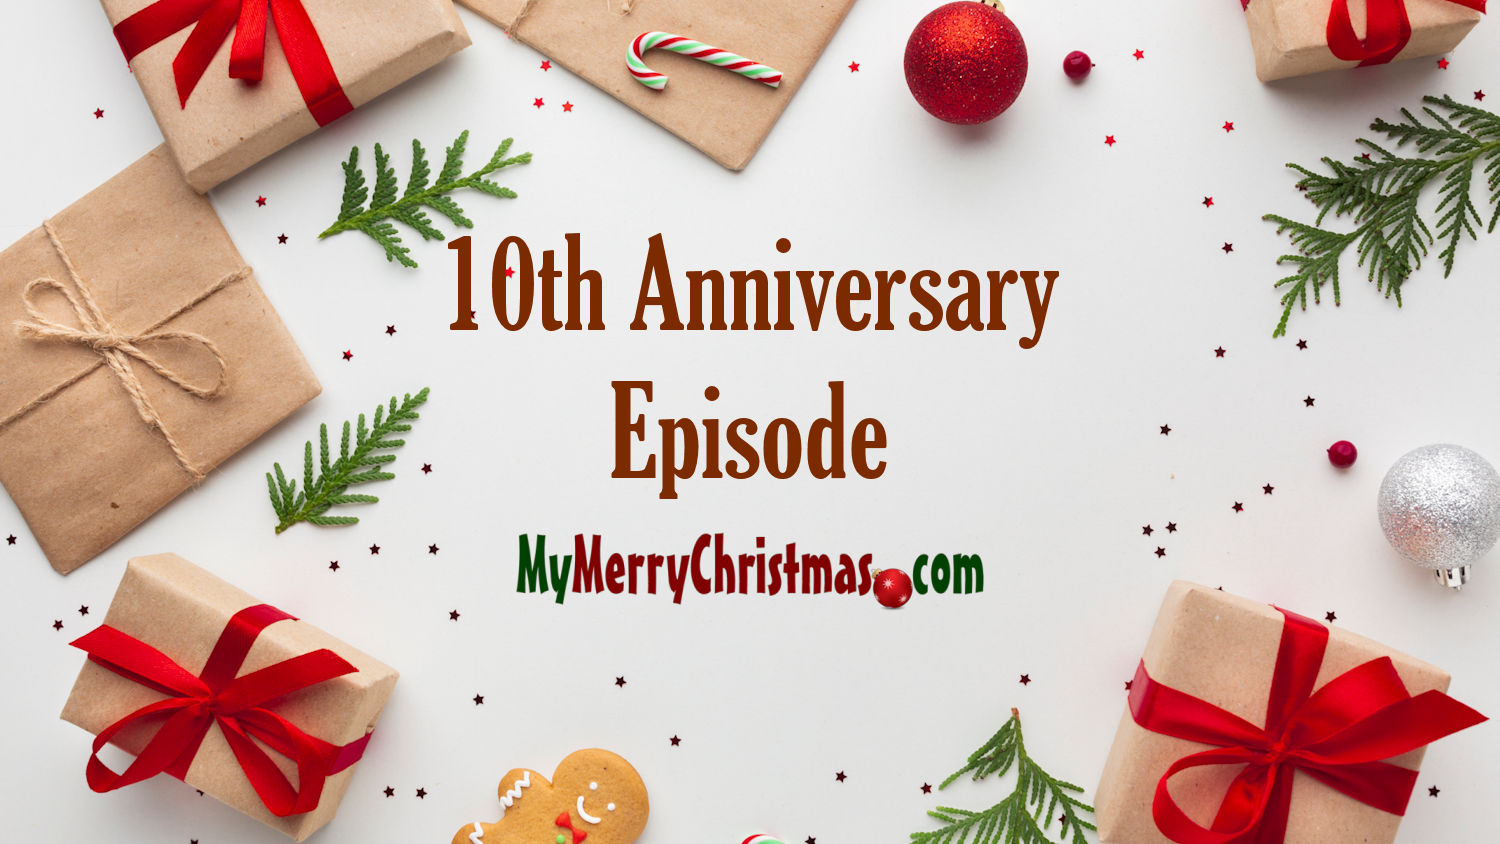 10th Anniversary of the Merry Podcast